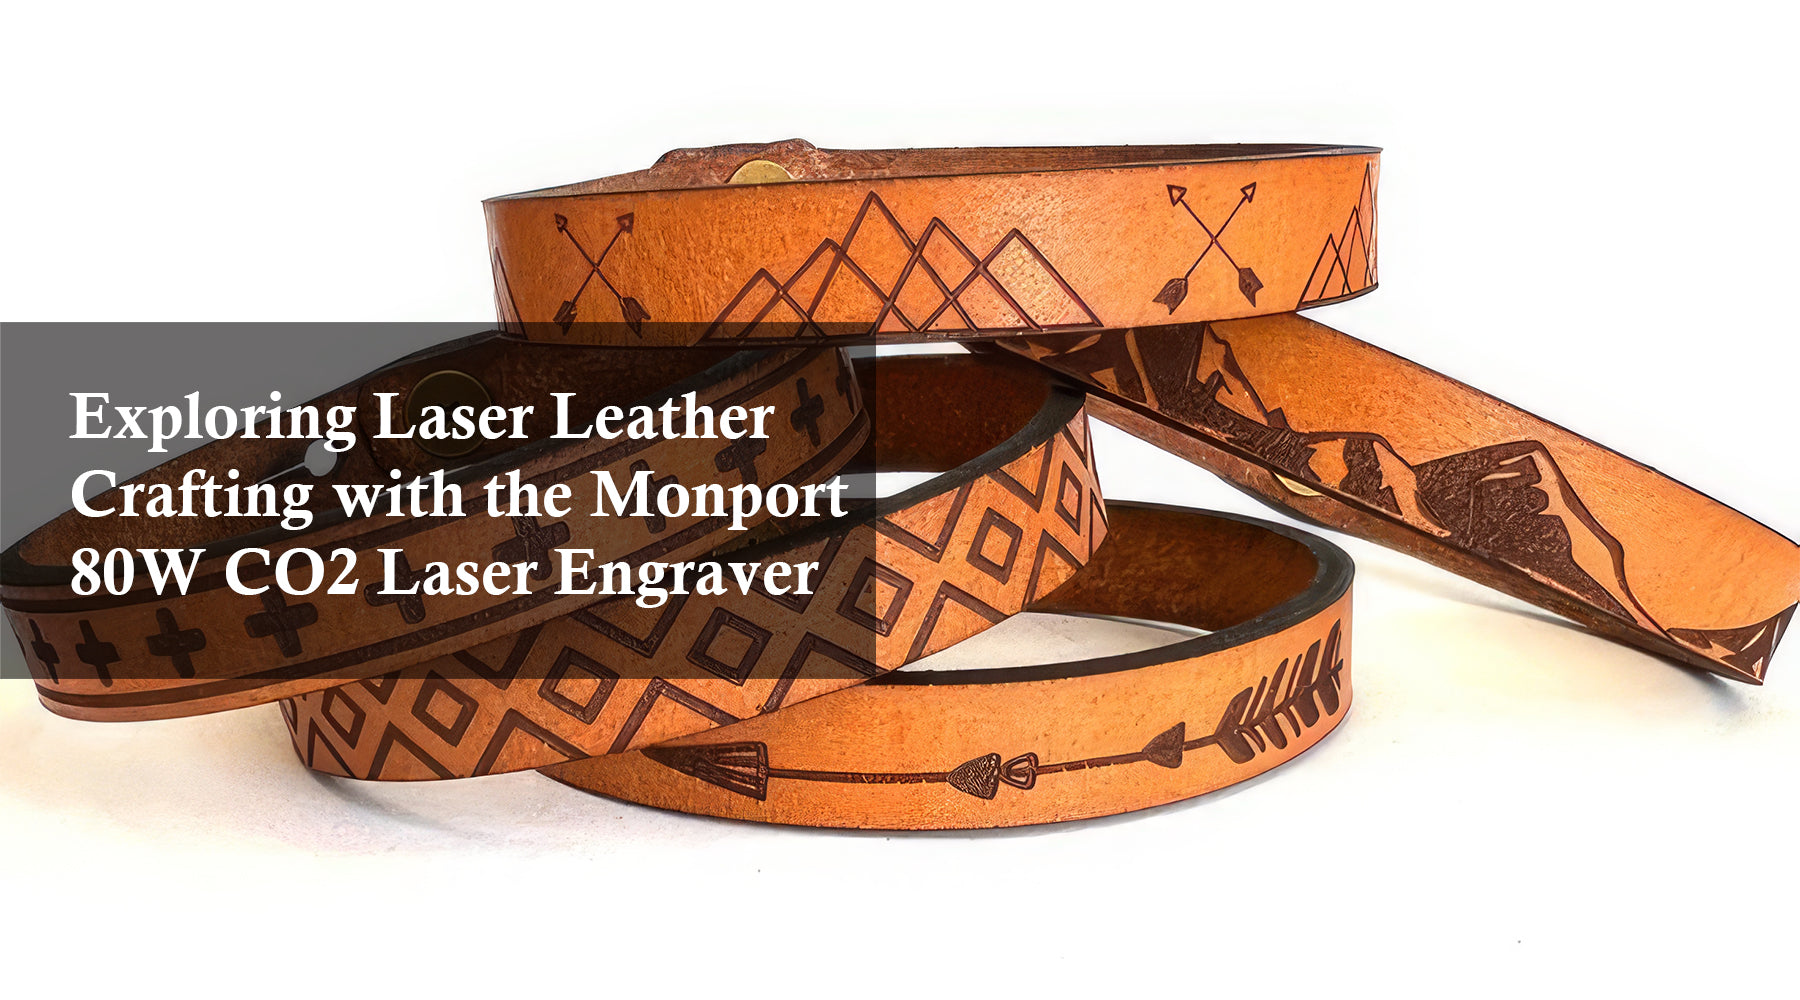 Exploring Laser Leather Crafting with the Monport 80W CO2 Laser Engraver